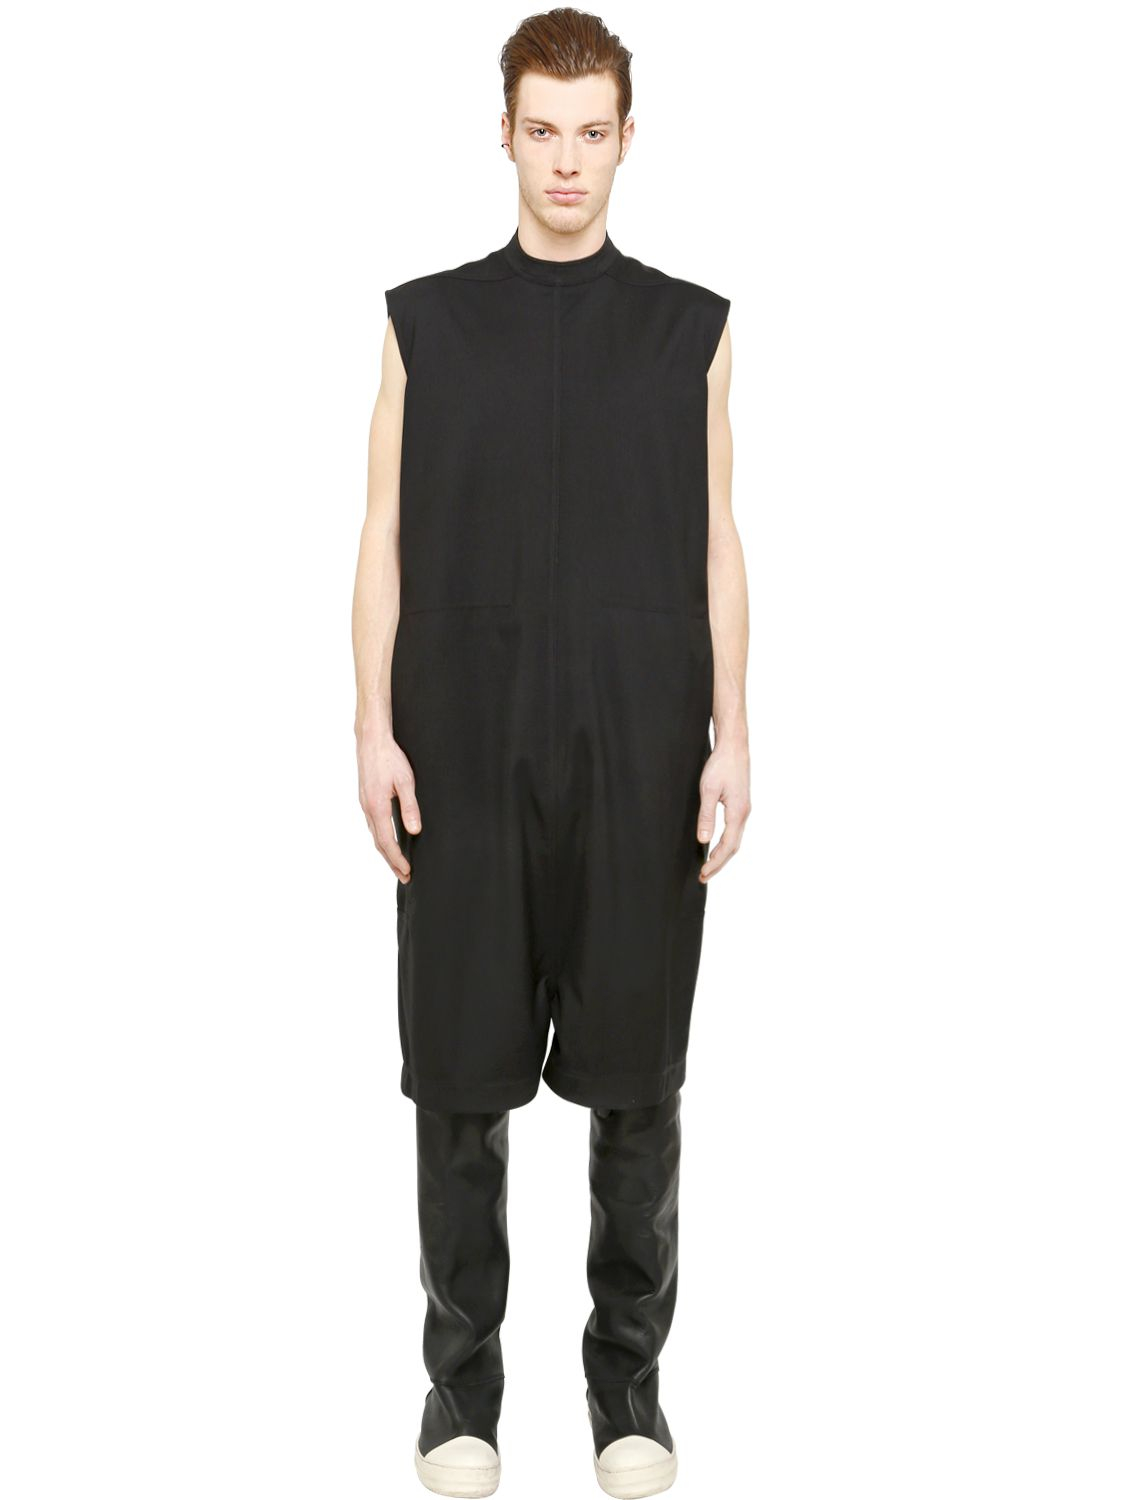 Lyst - Rick Owens Zipped Wool Canvas Jumpsuit in Black for Men